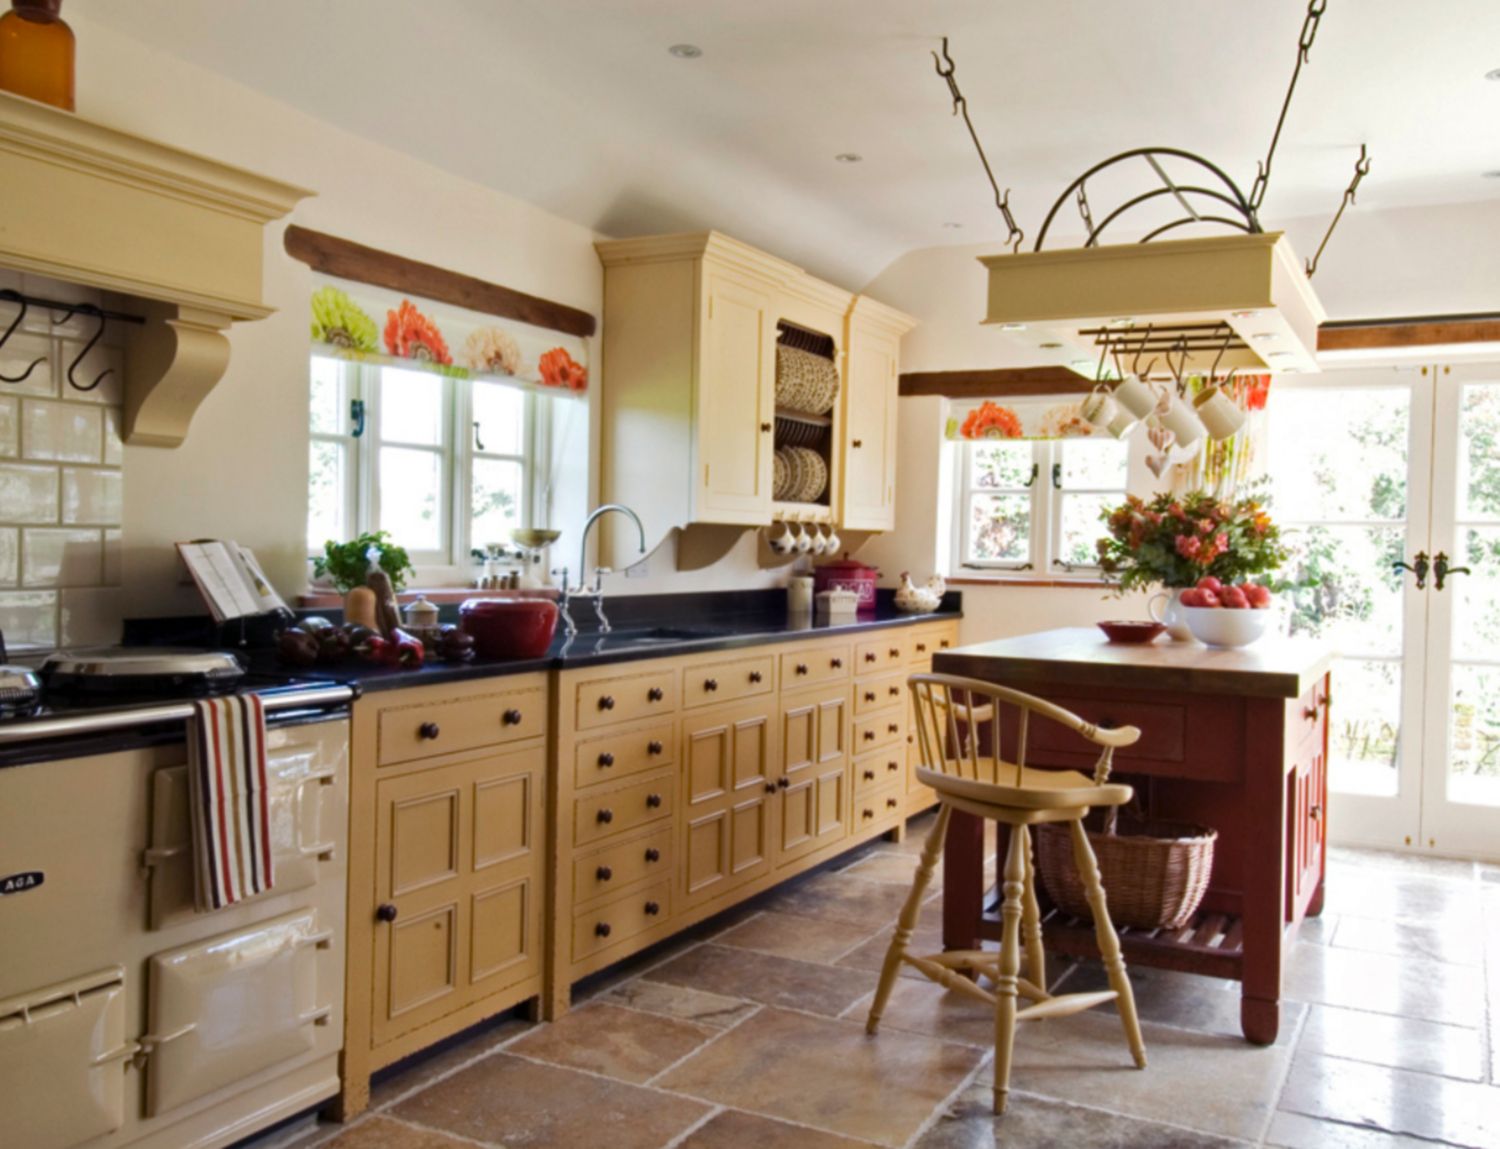 Freestanding Cabinets Offer a Classic Kitchen Look